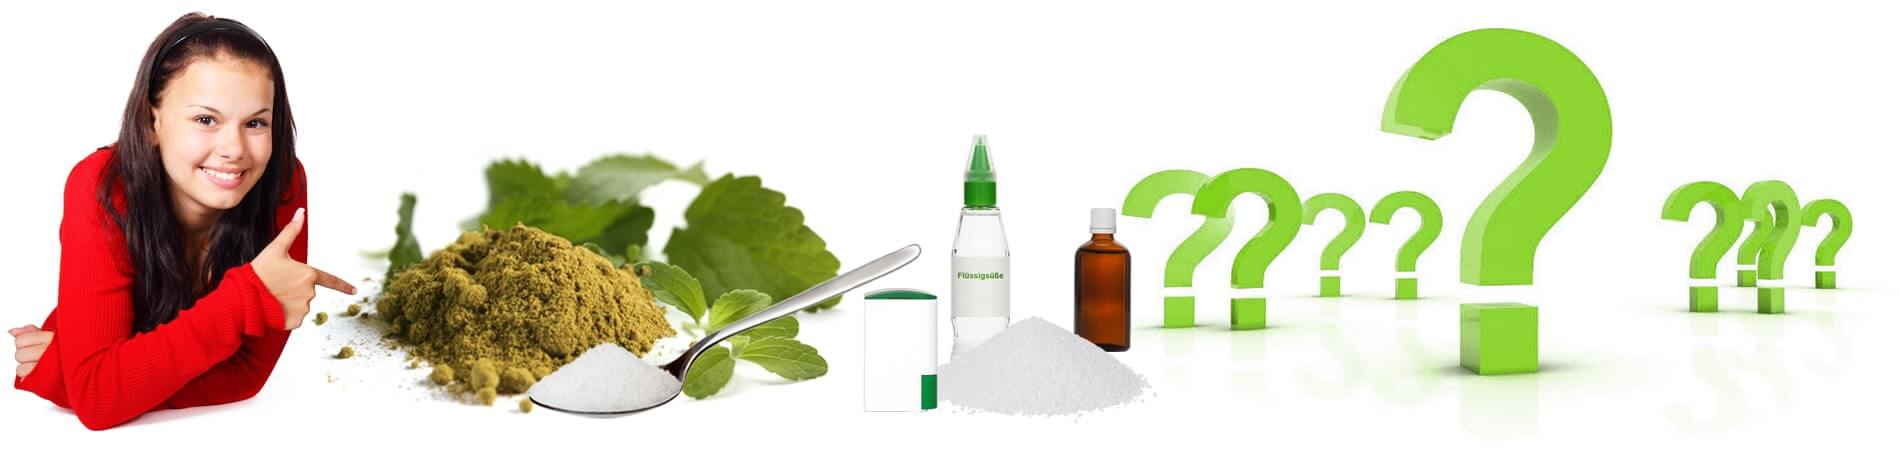 What to look out for when buying Stevia?